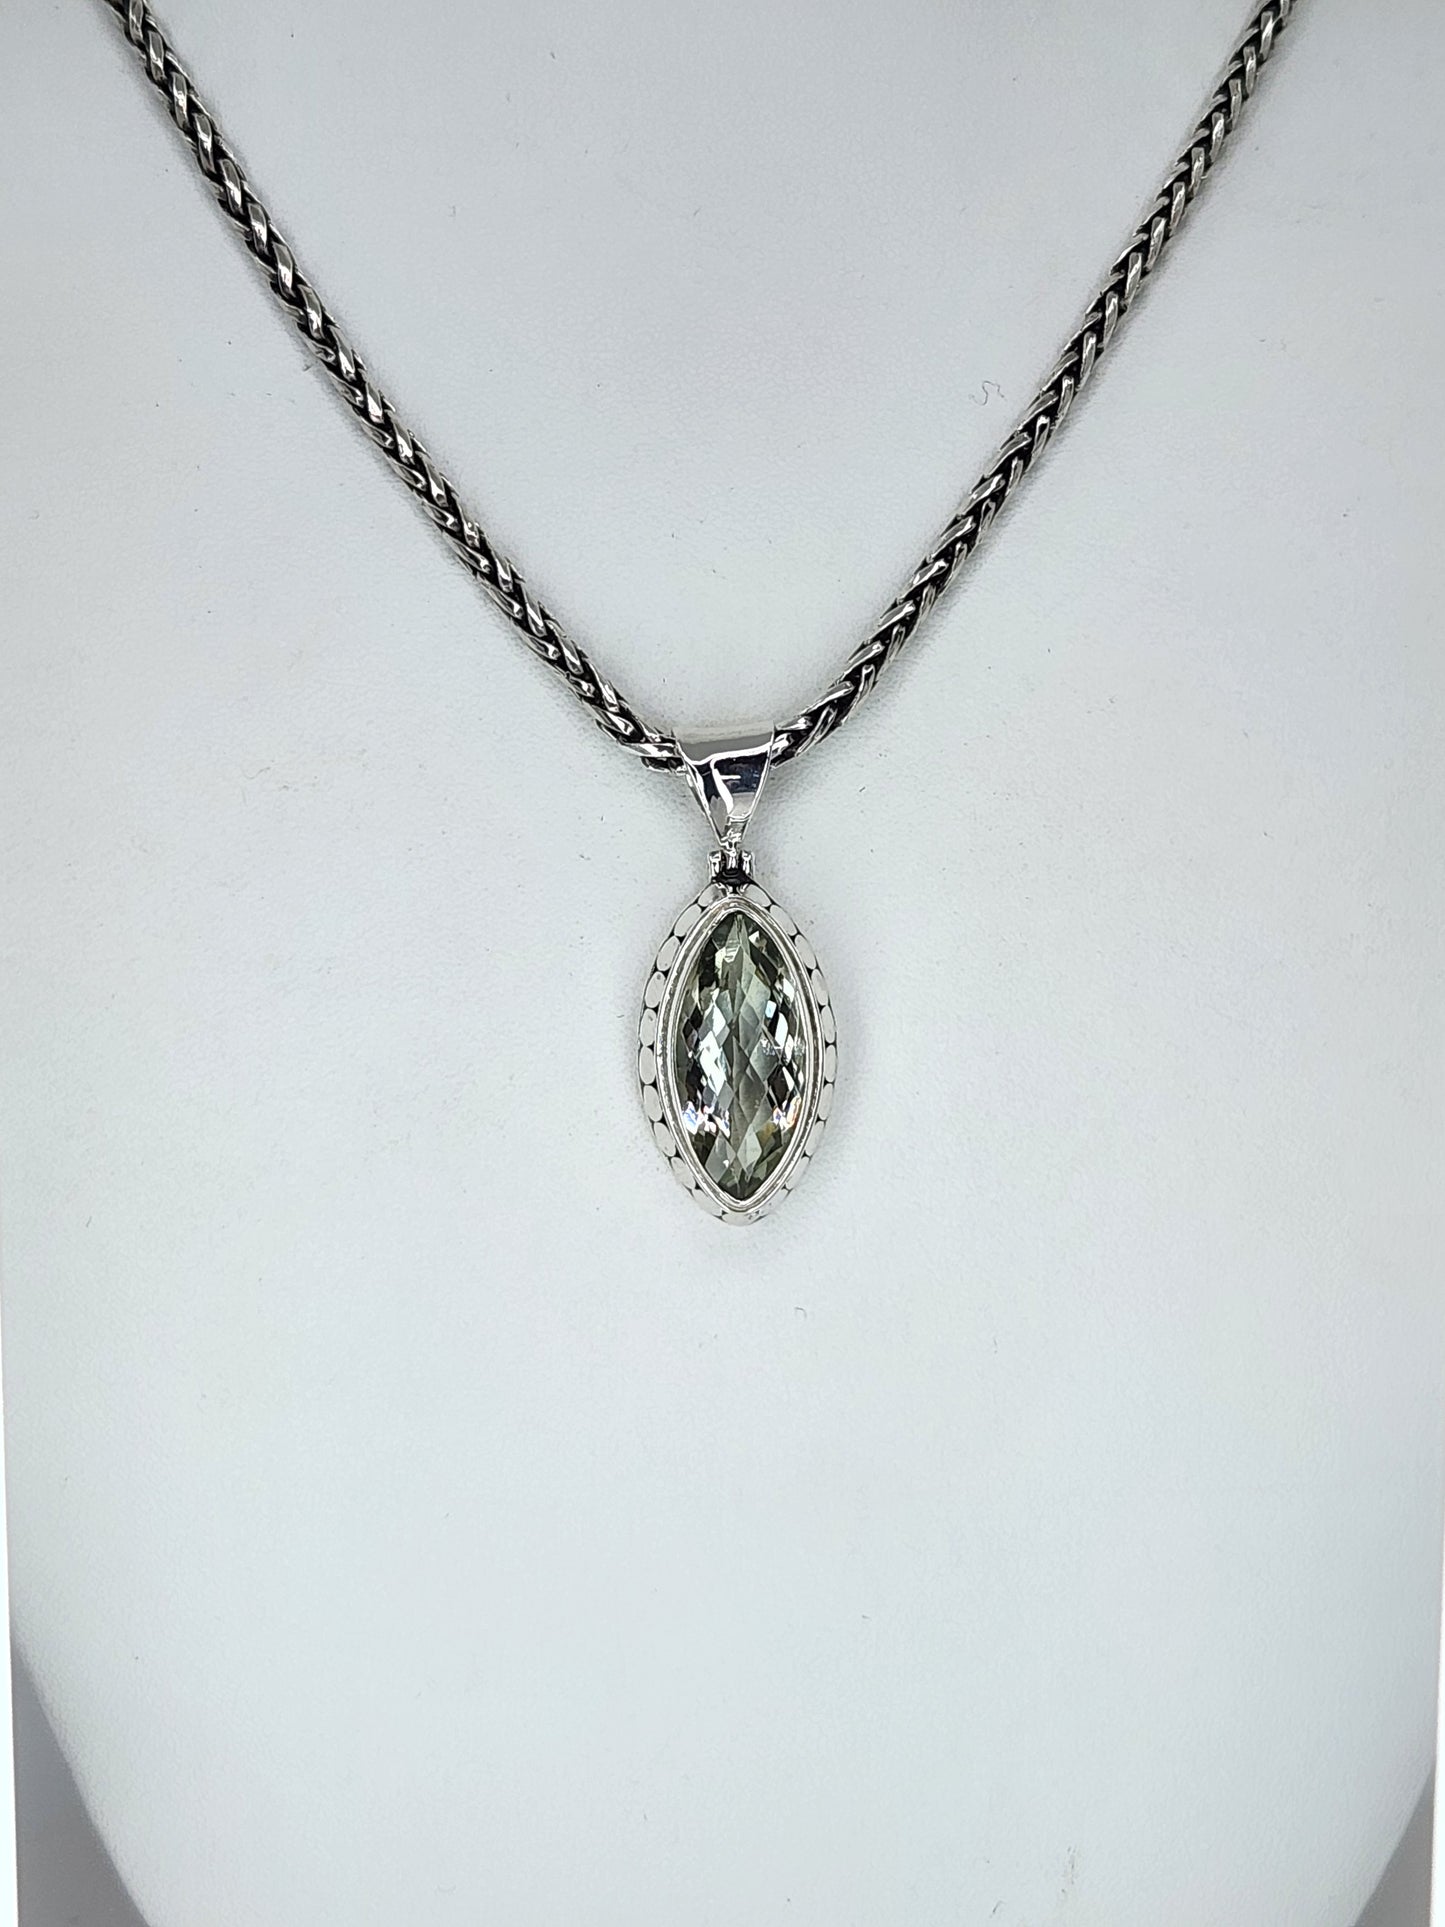 Janice Carson - Green Amethyst Marquis Cut Stone with Sterling Silver Necklace